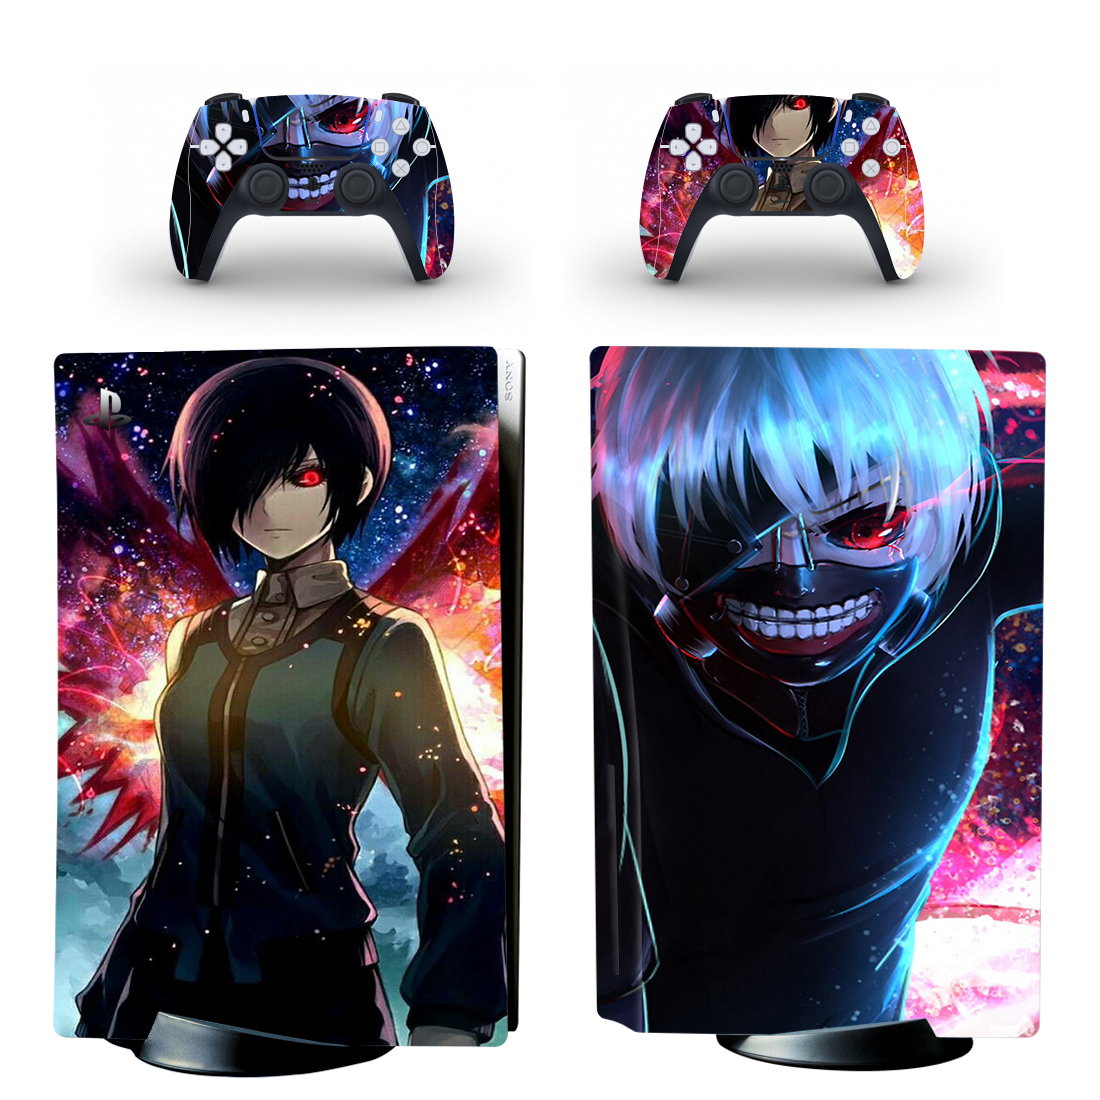 Tokyo Ghoul Skin Sticker Decal For PlayStation 5